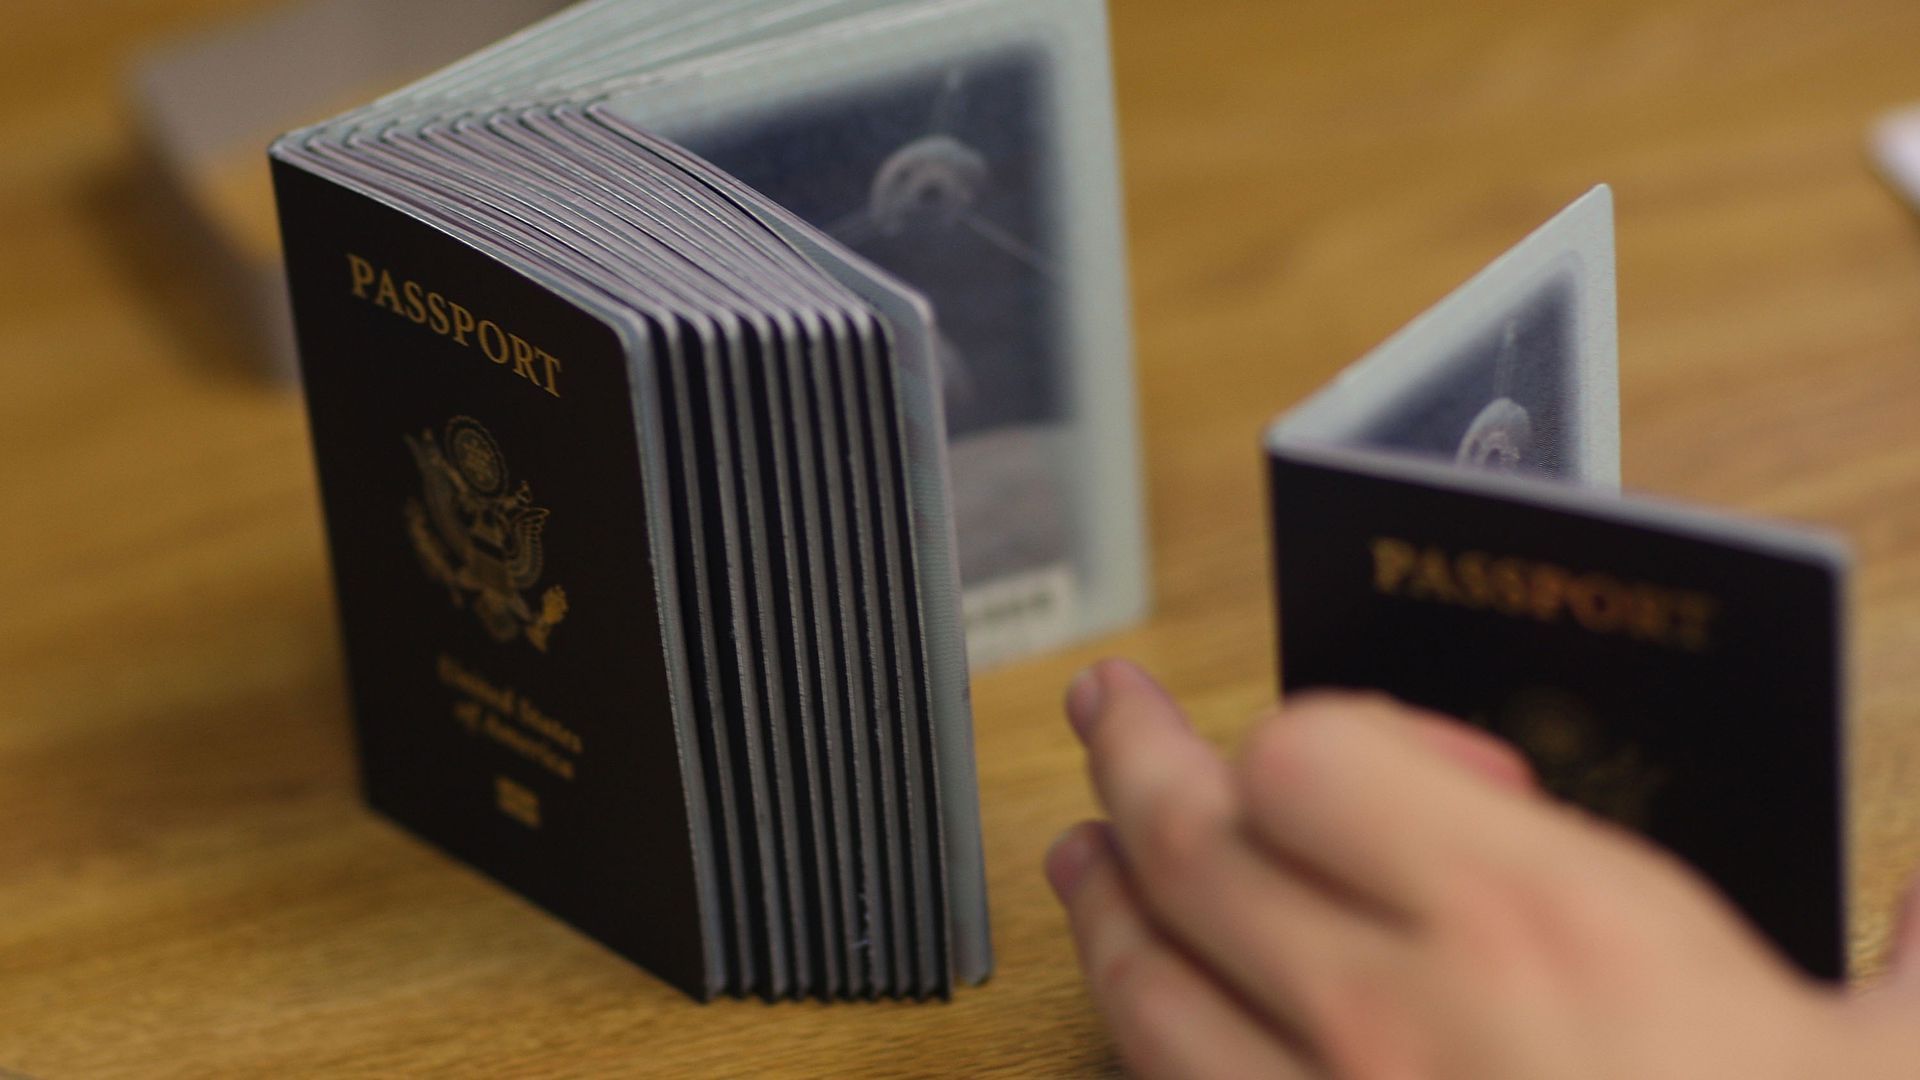 A photograph of a vertical stack of U.S. Passports